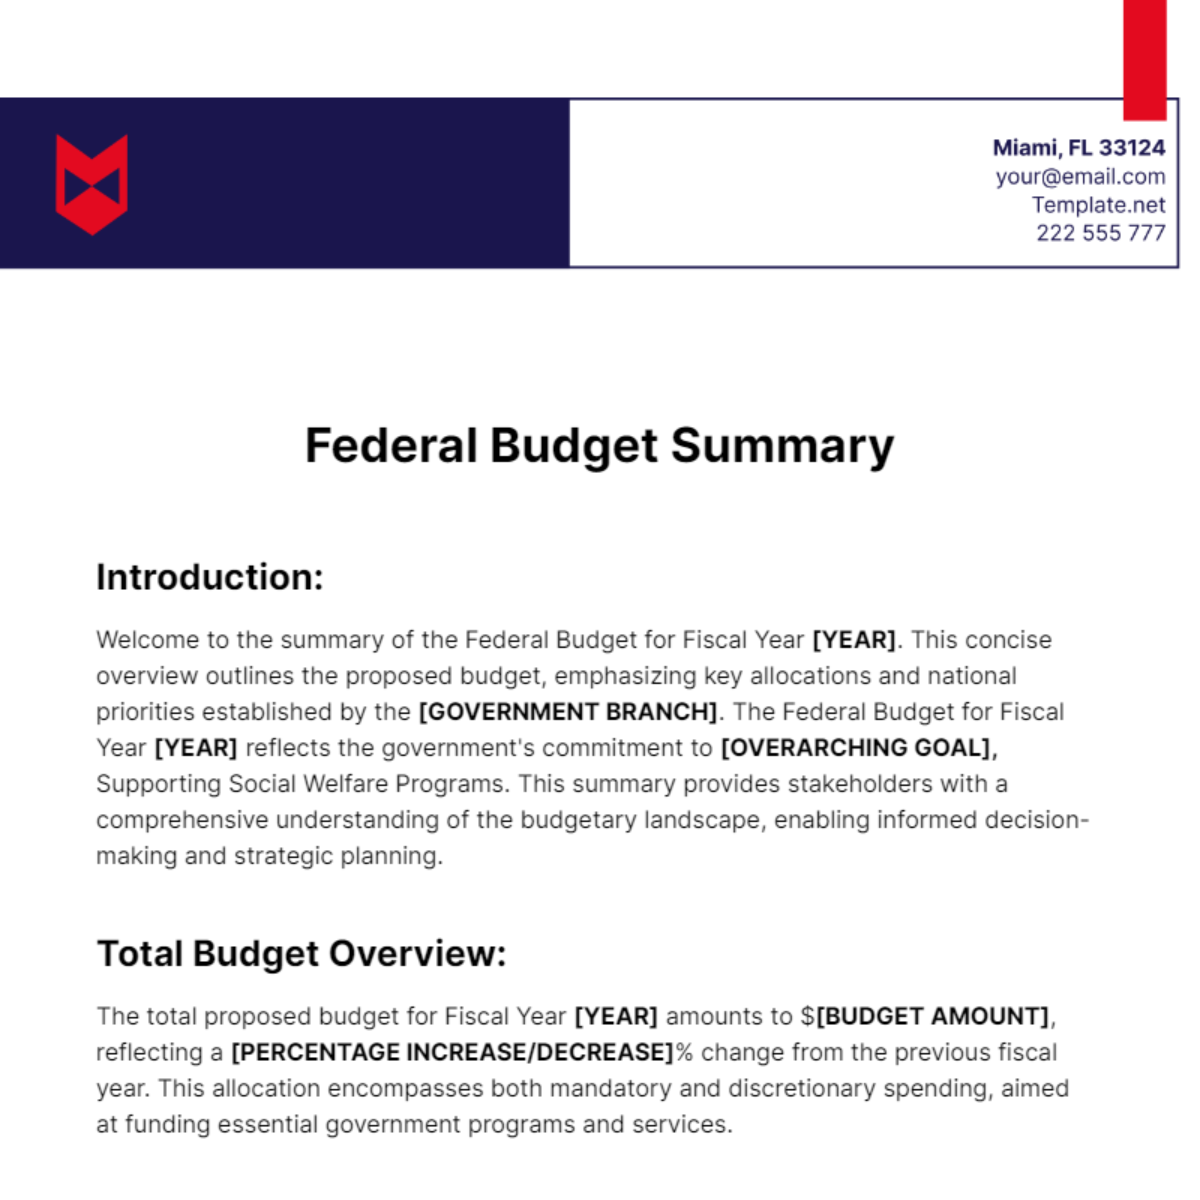 Federal Budget Summary Template